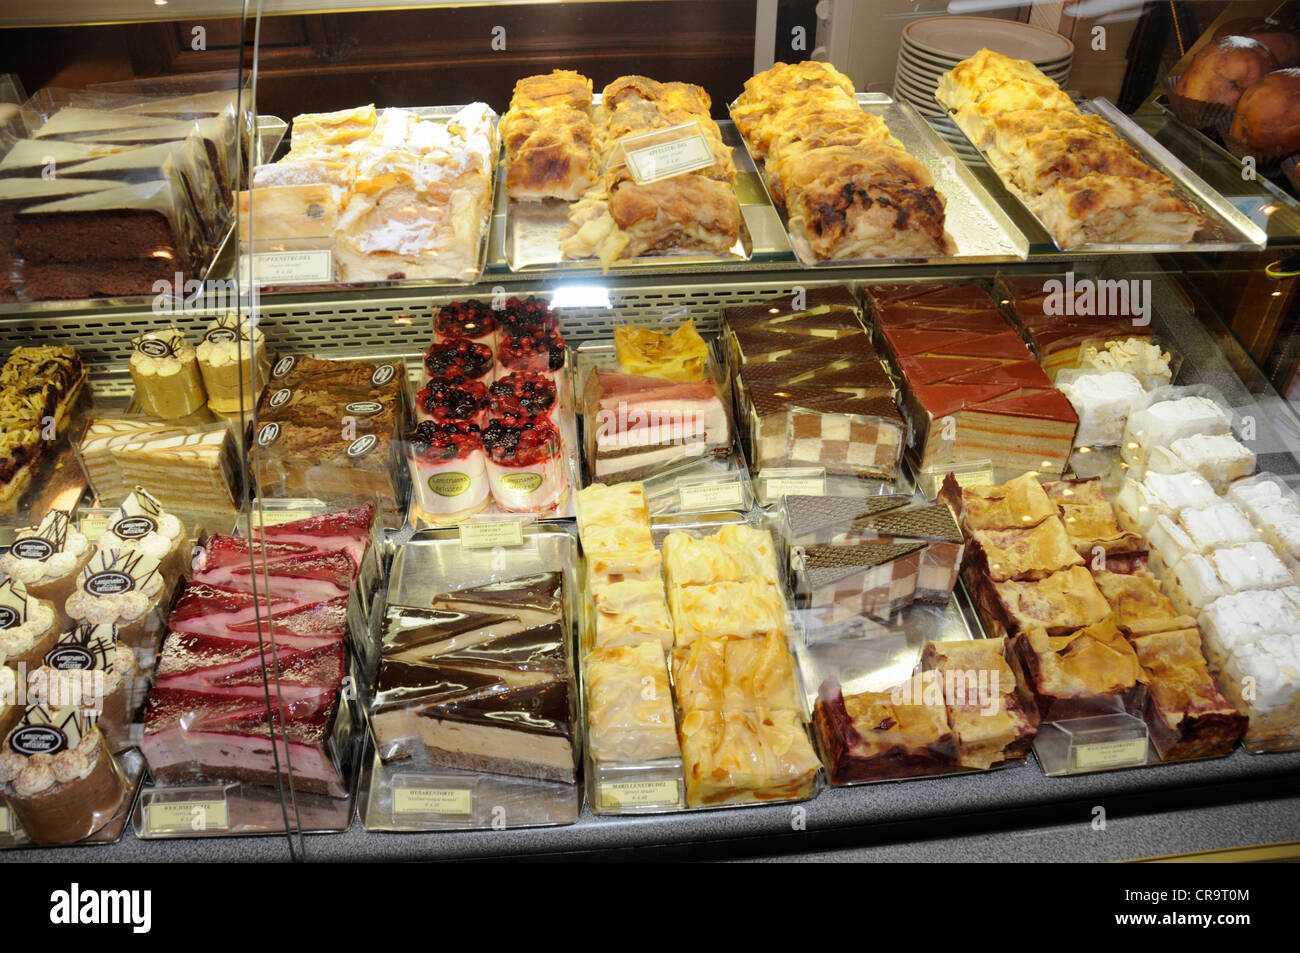 Austrian Cakes And Pastries In A Food Display Cabinet In A Cafe